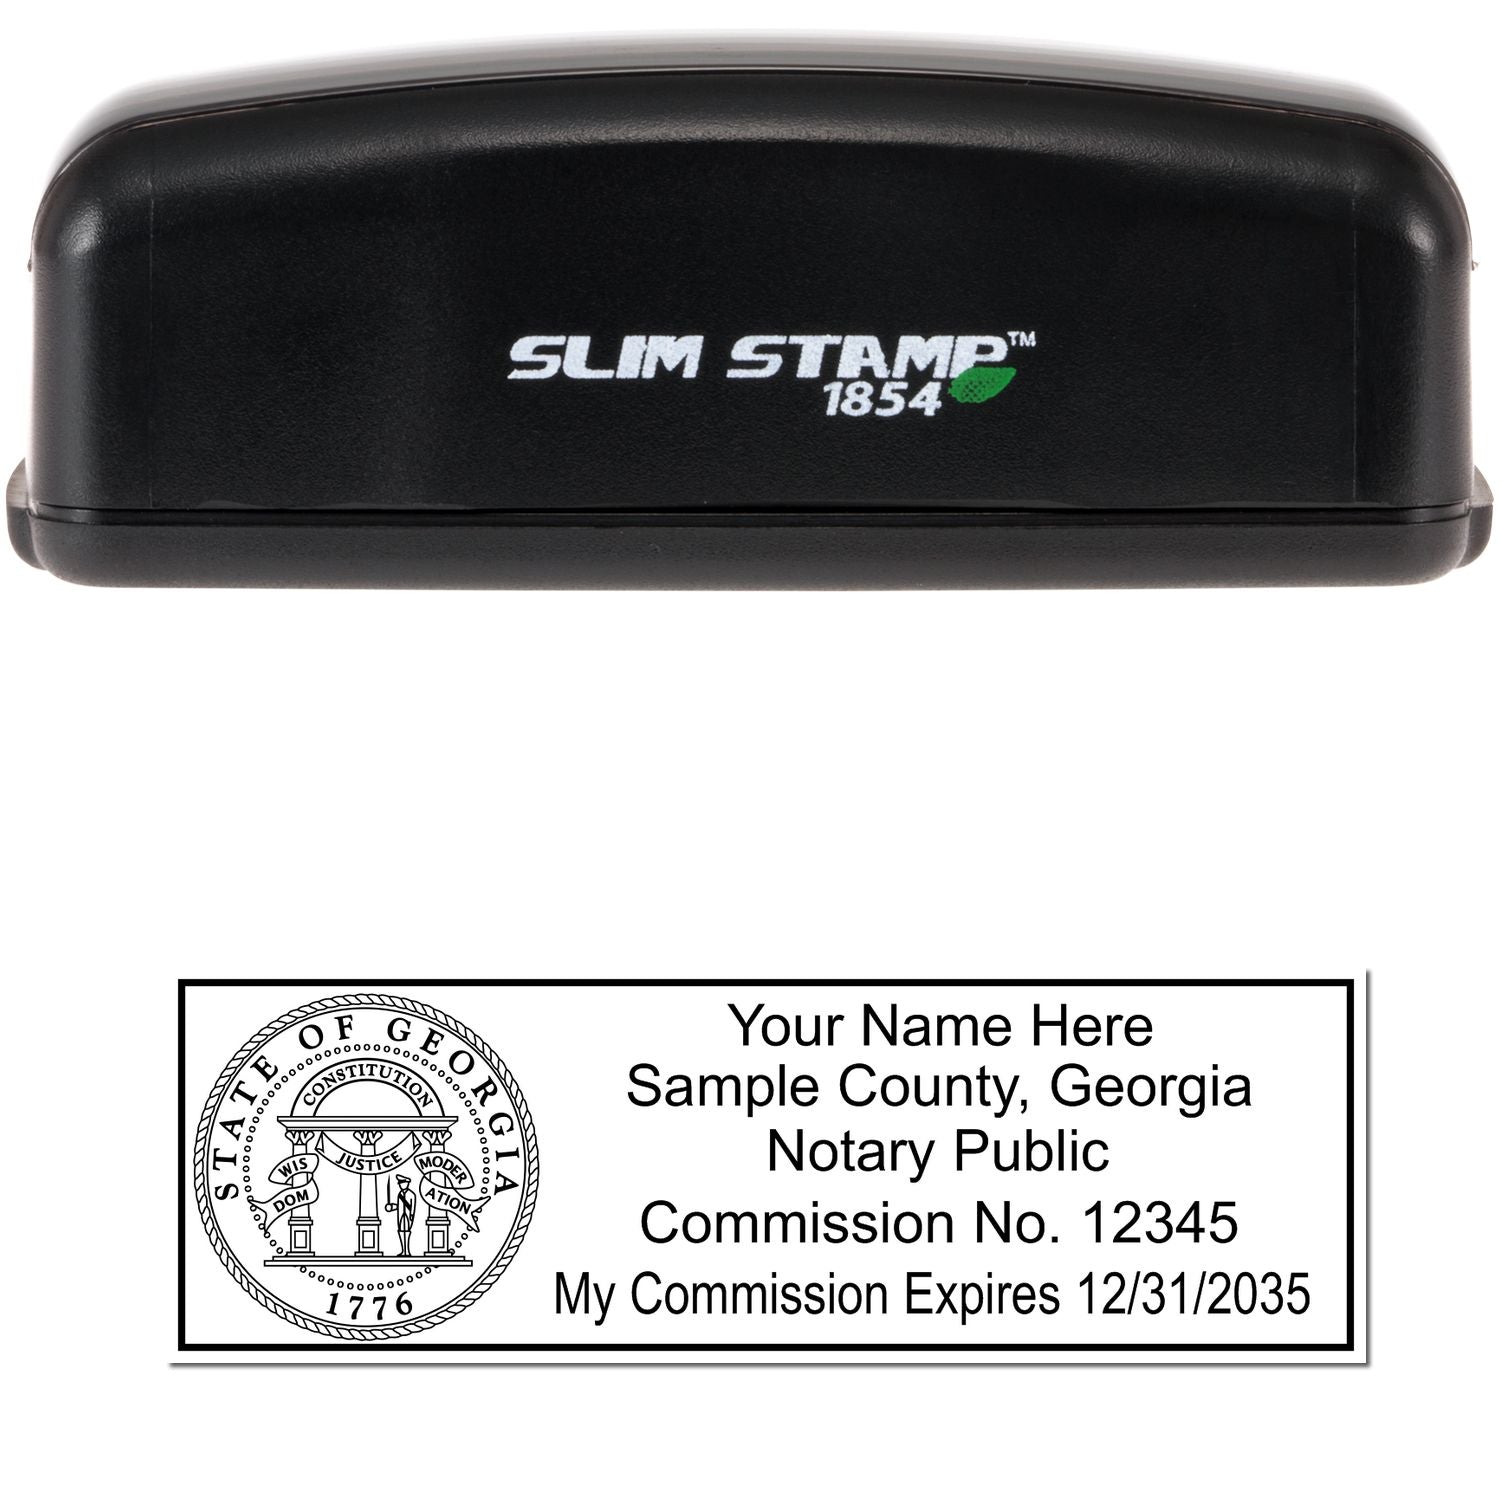 The main image for the Slim Pre-Inked Rectangular Notary Stamp for Georgia depicting a sample of the imprint and electronic files